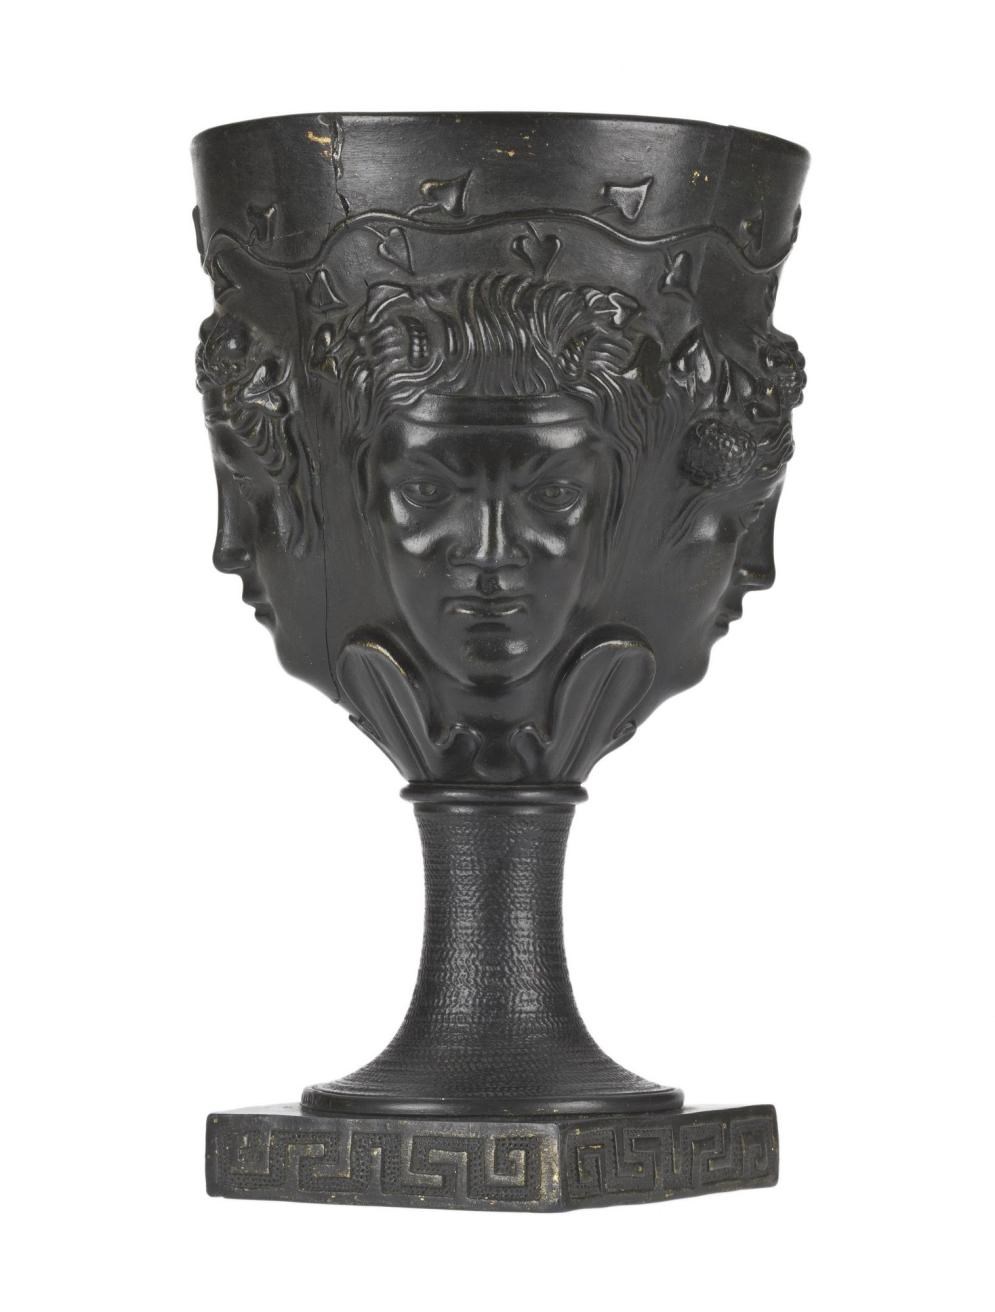 Goblet of ‘Egyptian black’ basalt ware by Delftfield Co, Glasgow - one of the most important pieces of 18th century Scottish pottery.